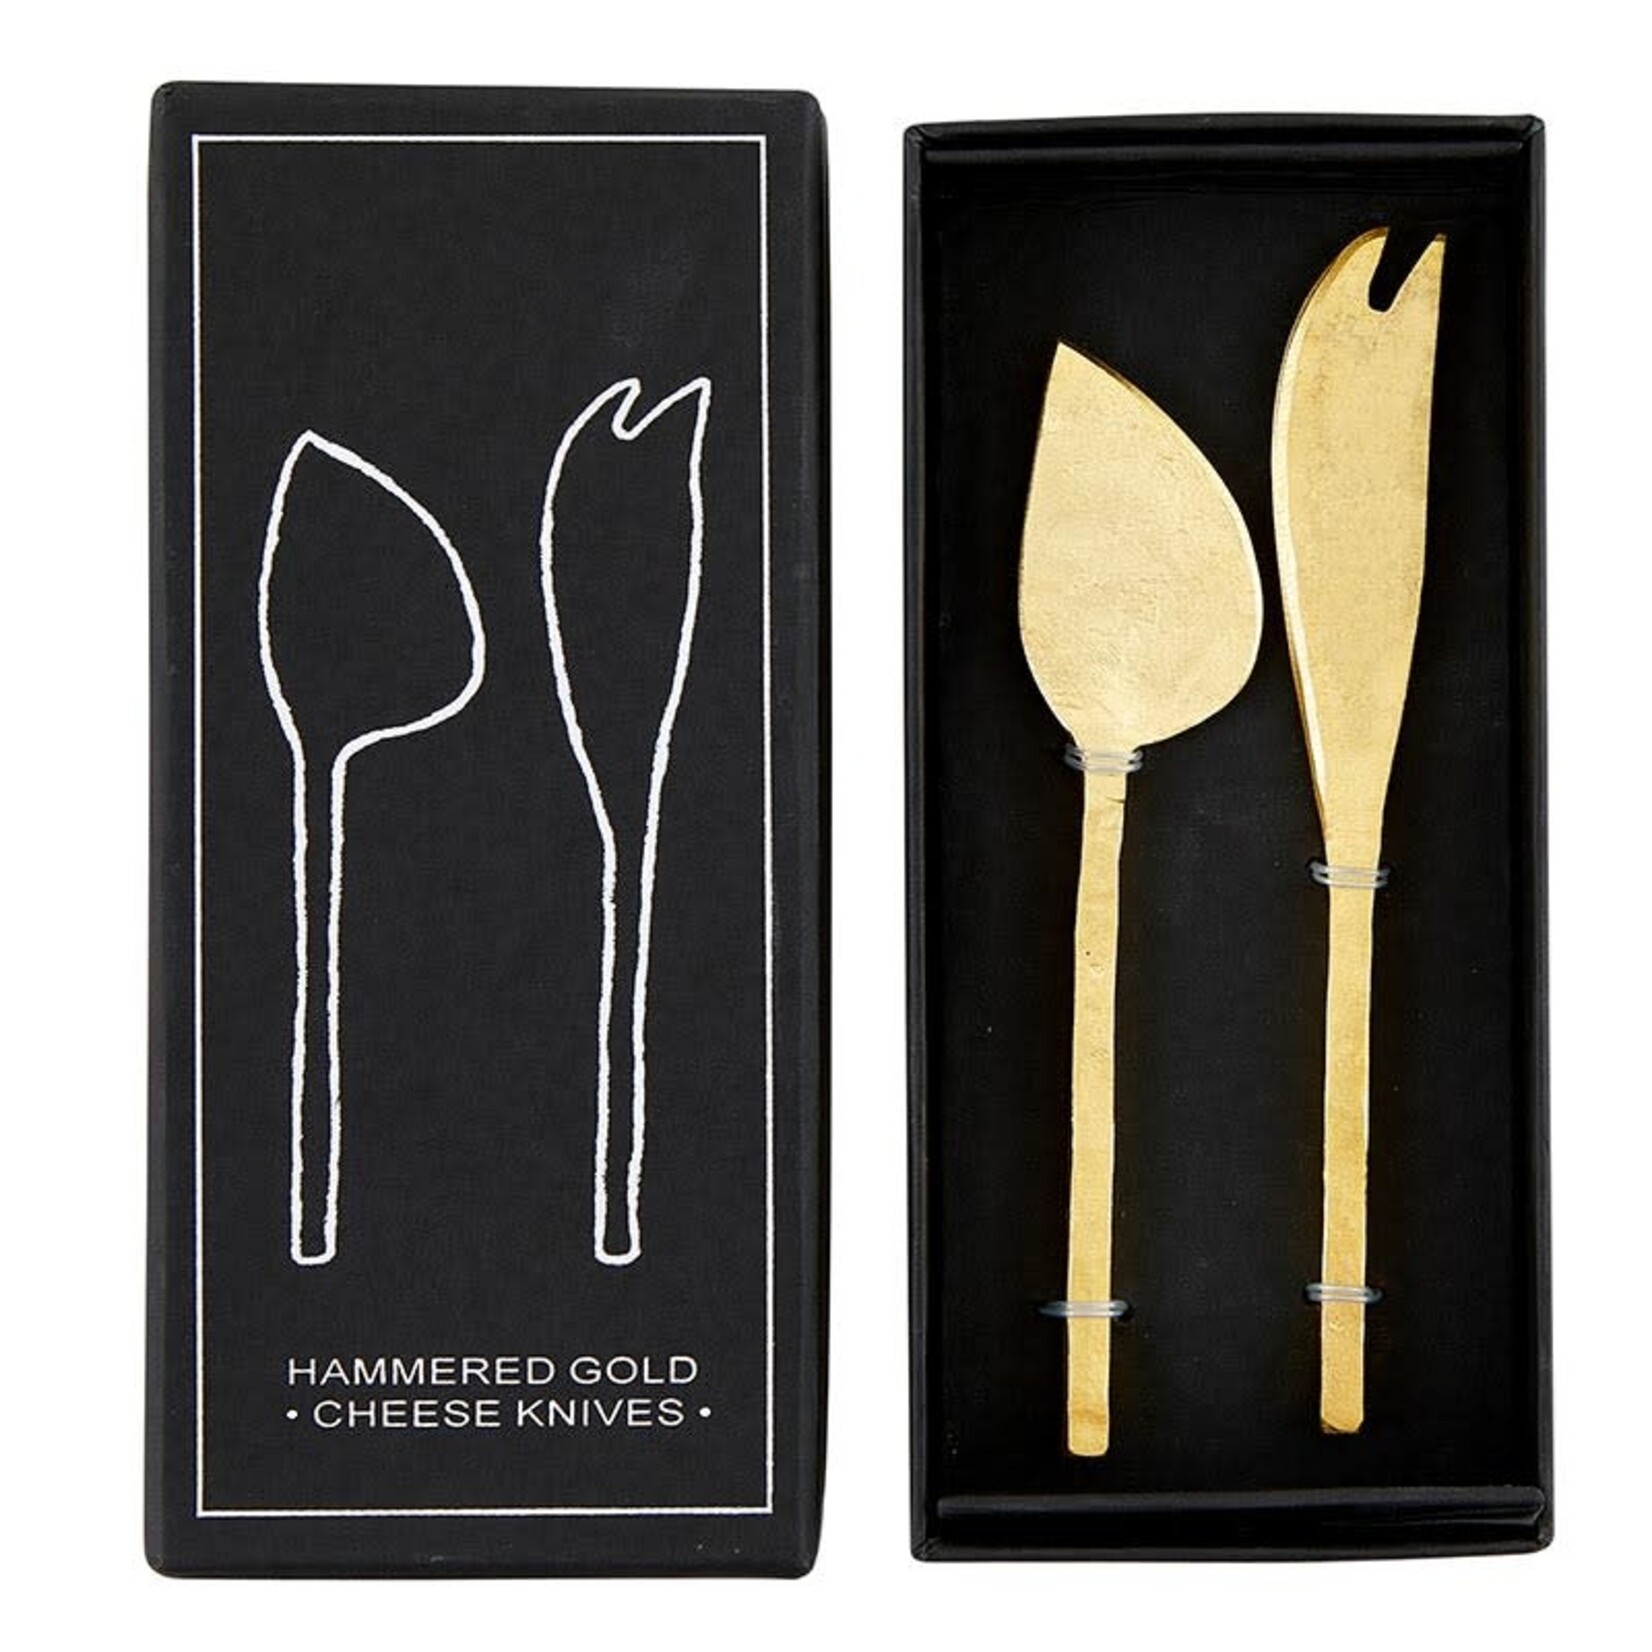 Outside The Box Set Of 2 Hammered Gold Cheese Knives W / Gift Box